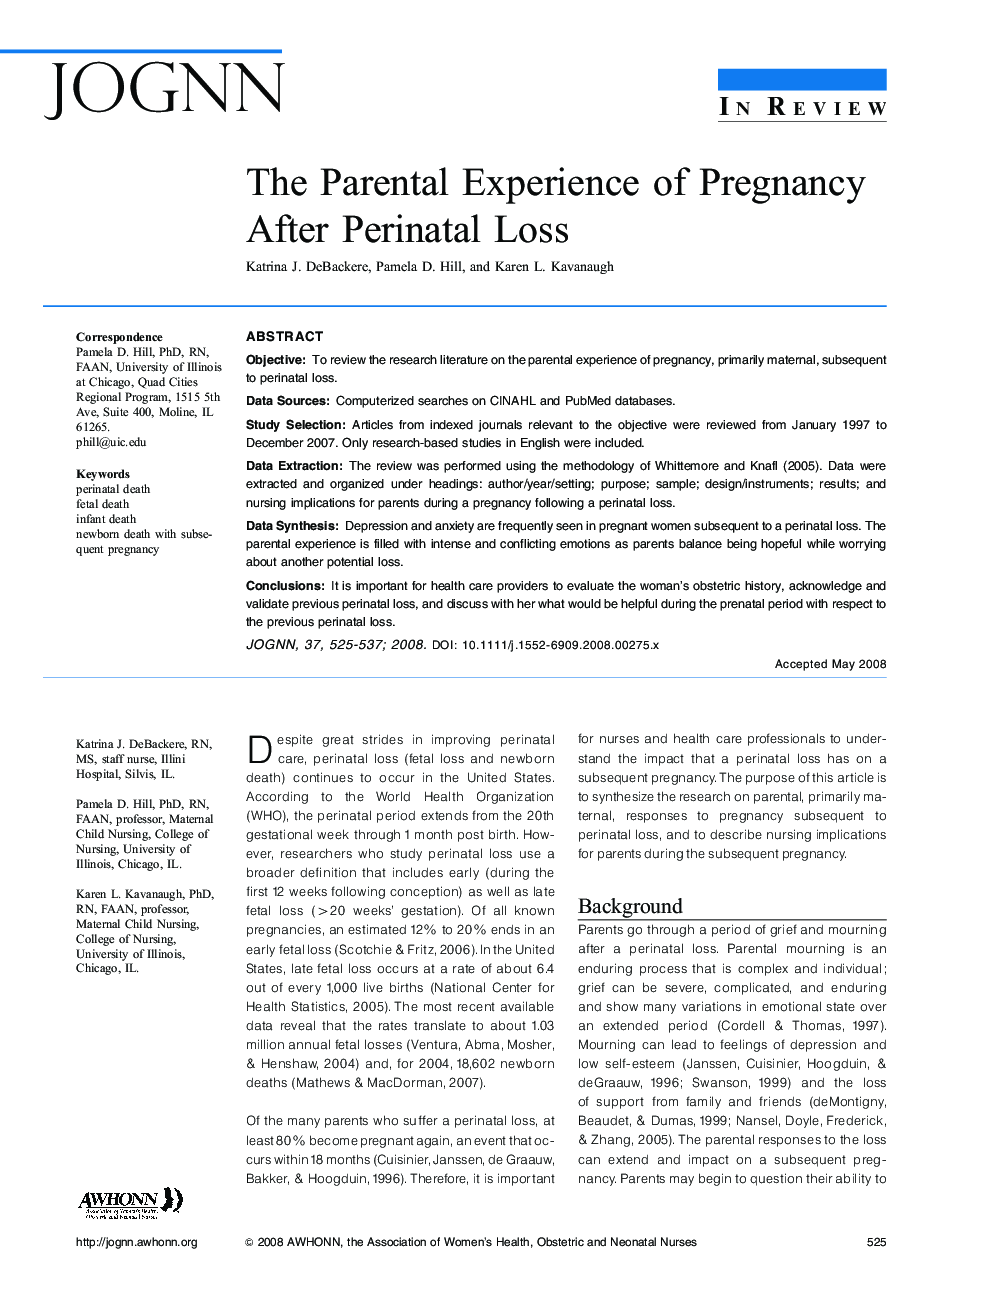 The Parental Experience of Pregnancy After Perinatal Loss